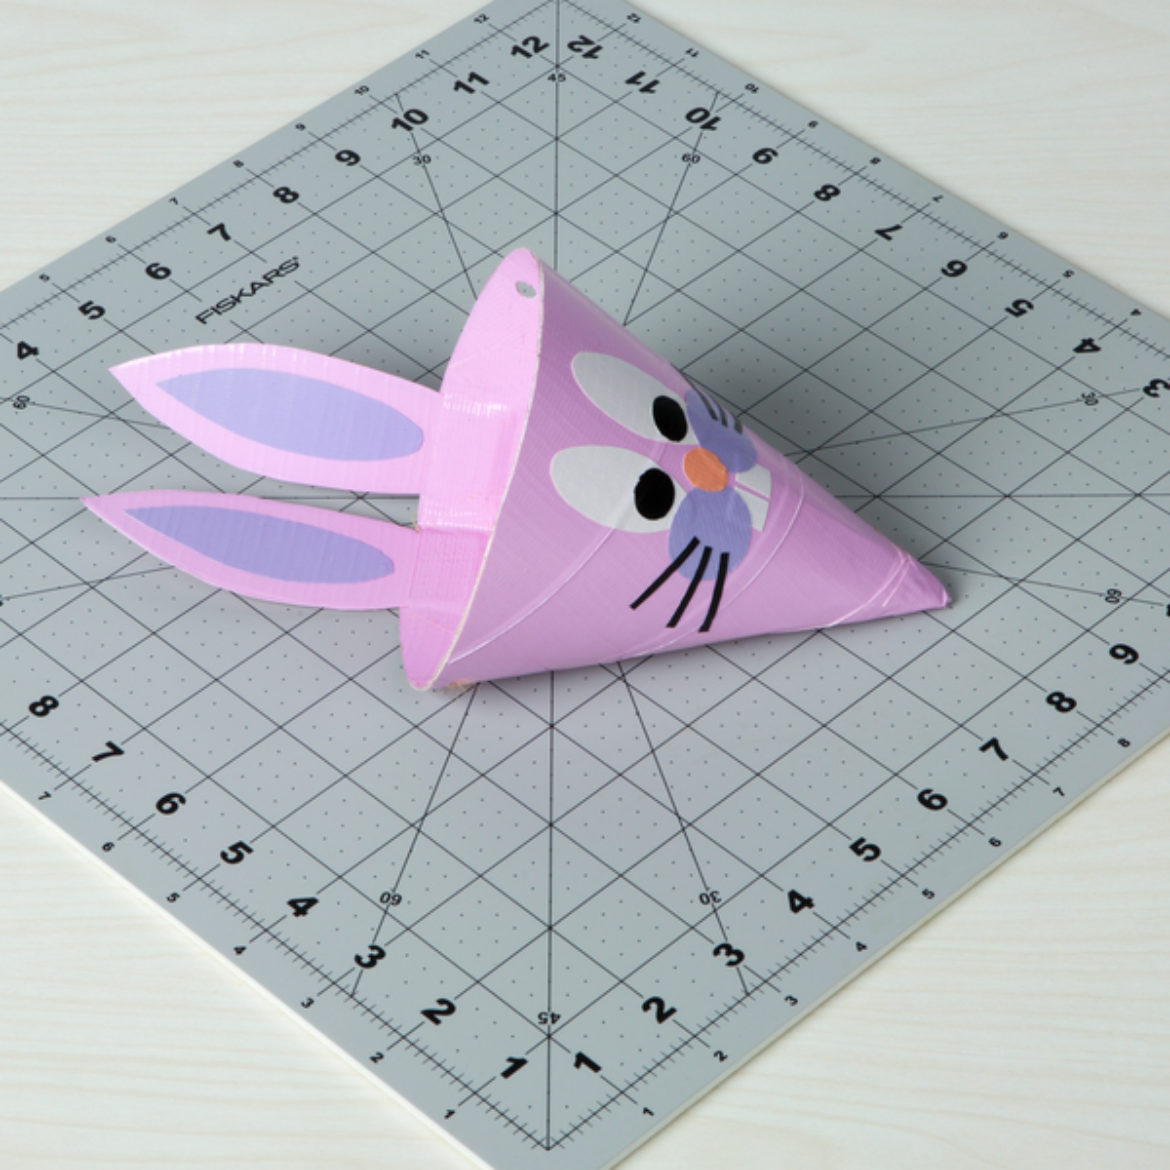 place all facial features on the cone, and attach the ears to the backside of the cone